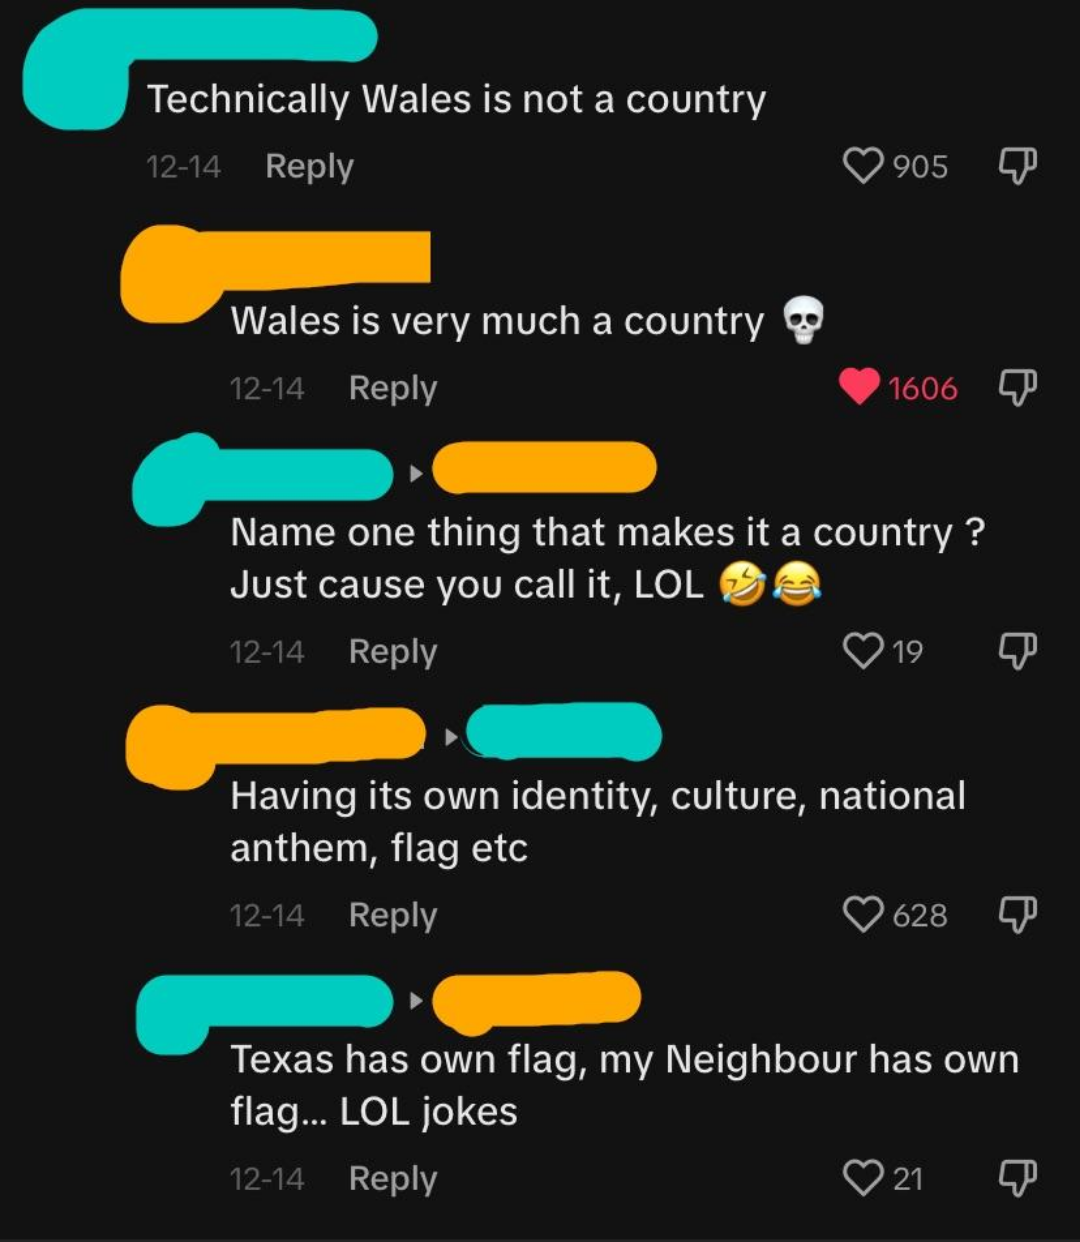 Text exchange: &quot;Technically Wales is not a country,&quot; &quot;Wales is very much a country,&quot; &quot;Name one thing that makes it a country?&quot; &quot;Having its own identify, culture, national anthem, flag,&quot; and &quot;Texas has own flag, my neighbor has own flag&quot;